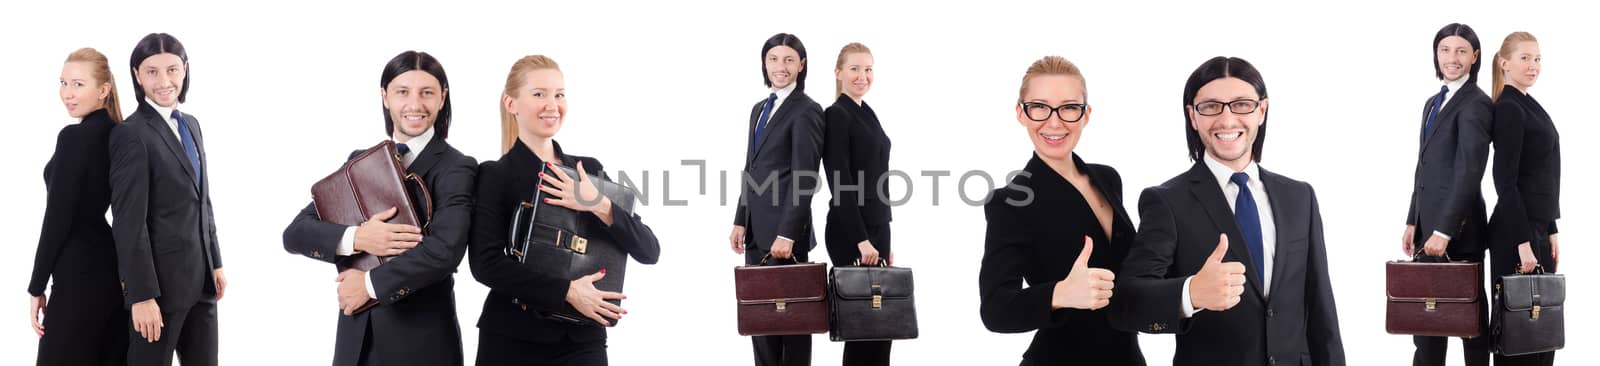 Businessman and businesswoman with briefcases isolated on white